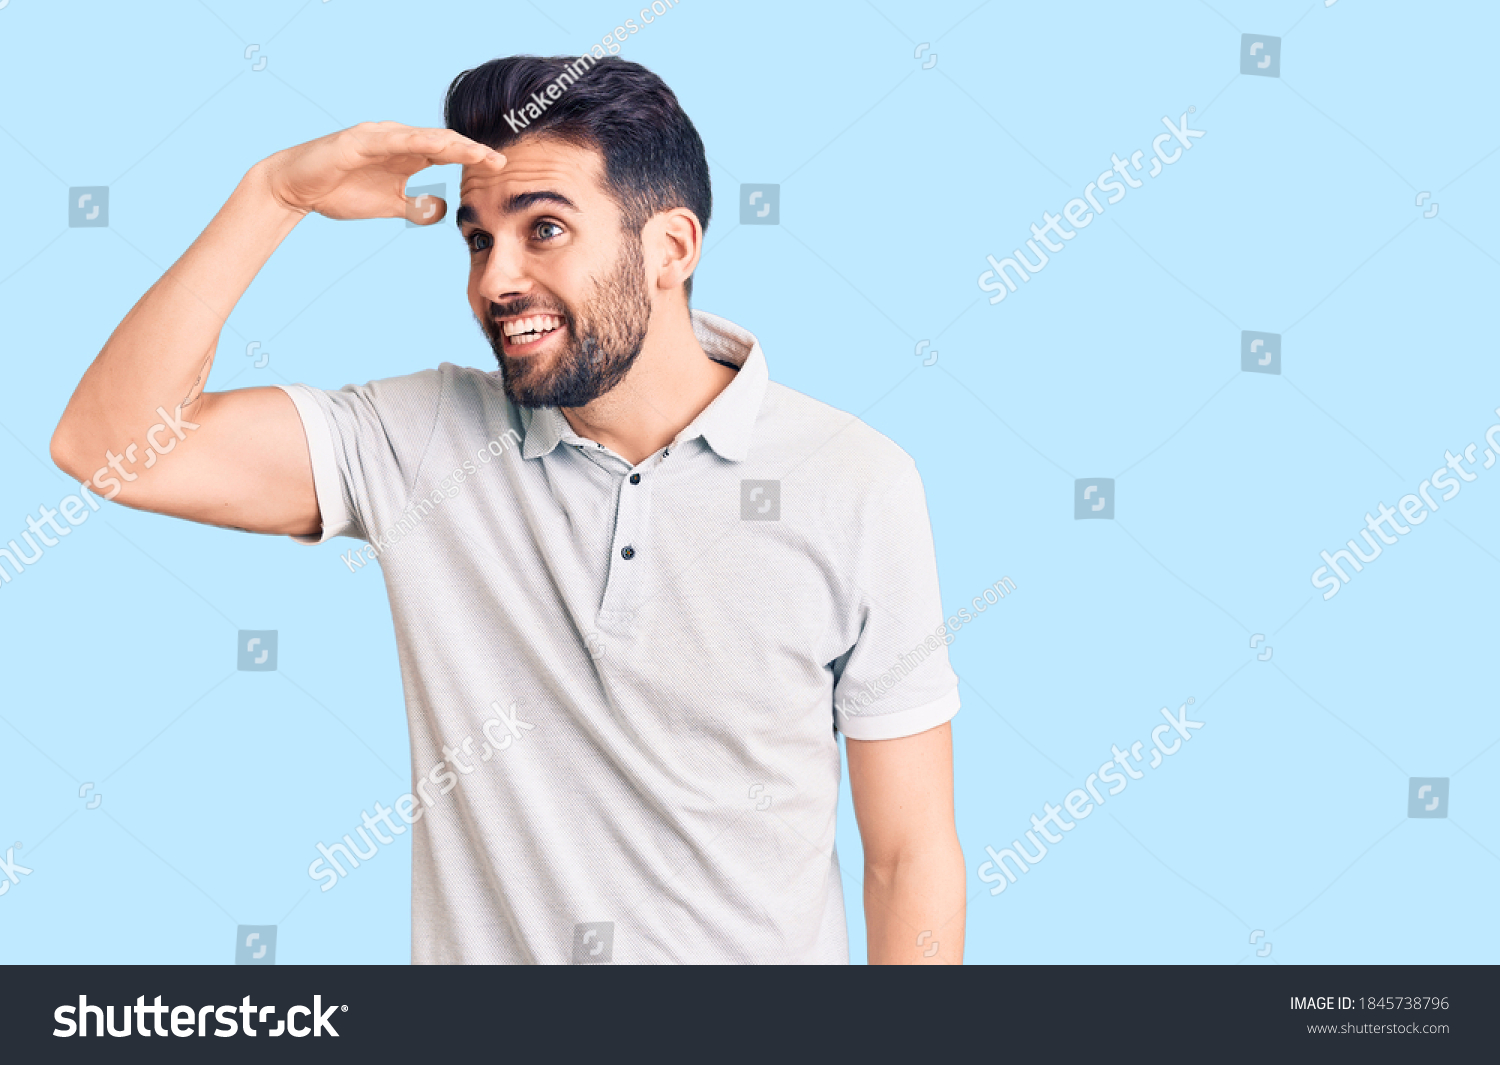 Young handsome man with beard wearing casual polo very happy and smiling looking far away with hand over head. searching concept.  #1845738796